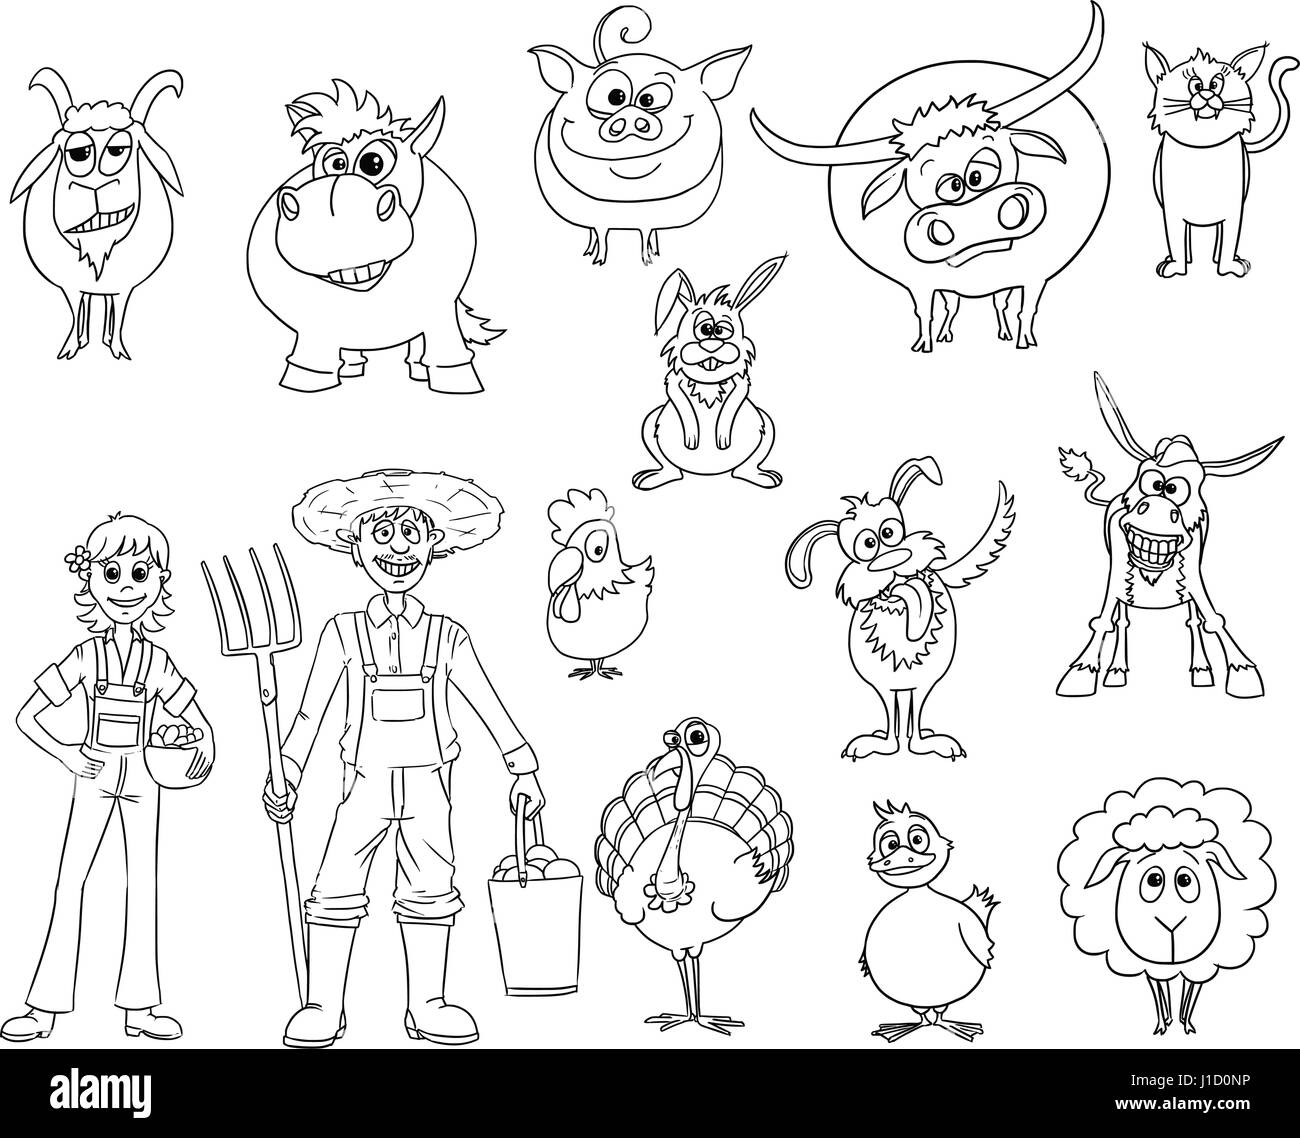 Hand drawn set of cartoon vector farm animals and male and female farmers Stock Vector